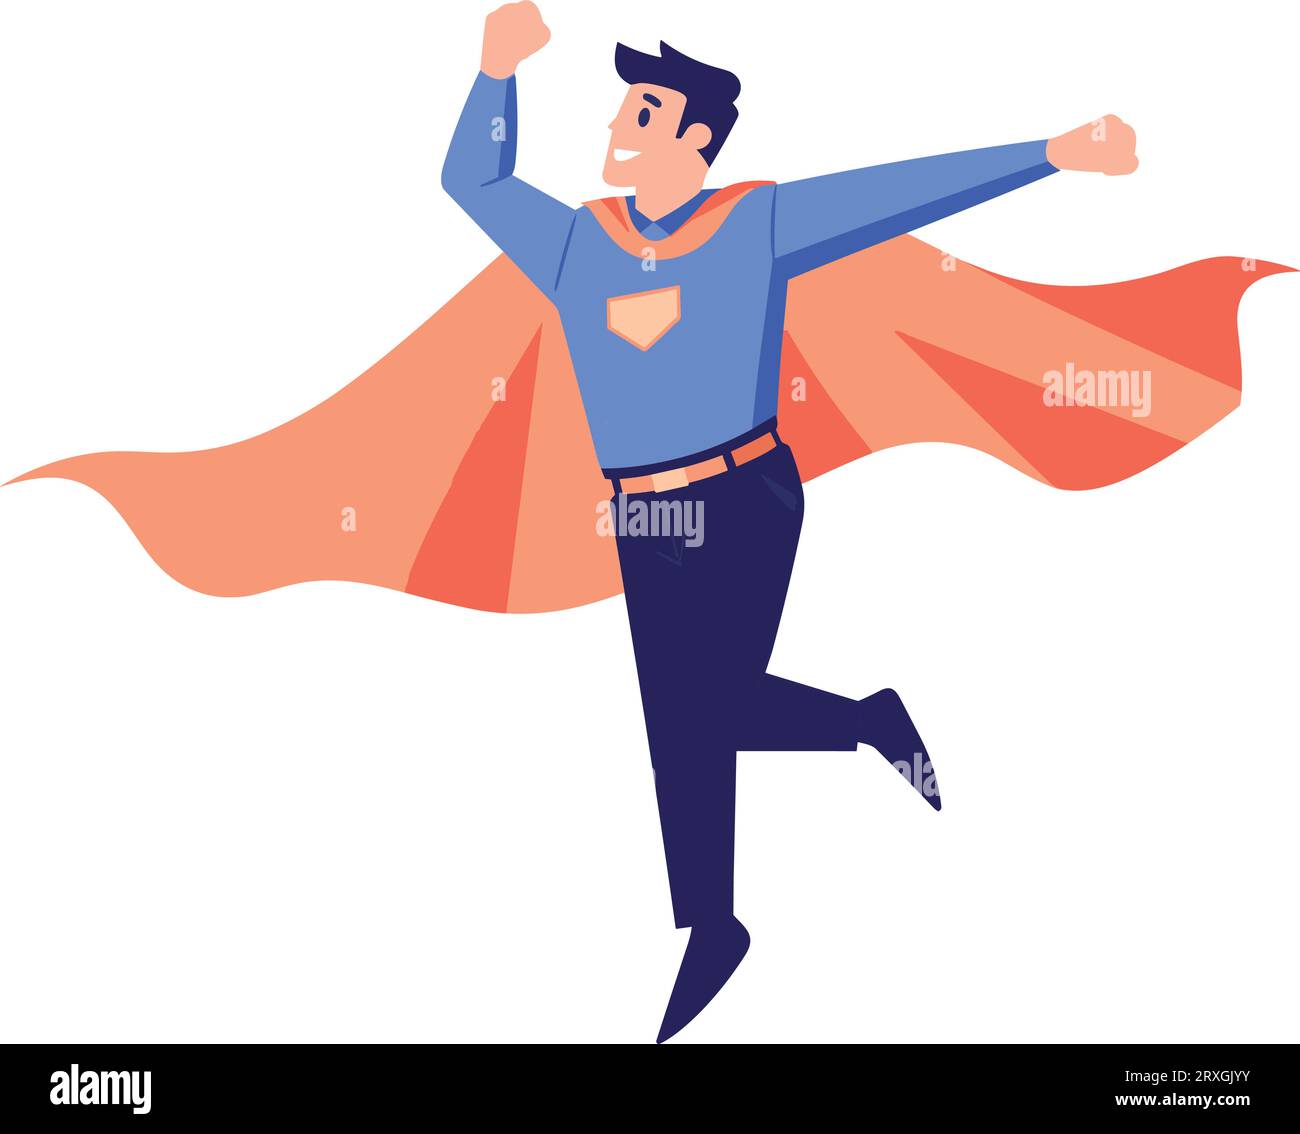 Hand Drawn Male businessman with hero cape in flat style isolated on background Stock Vector